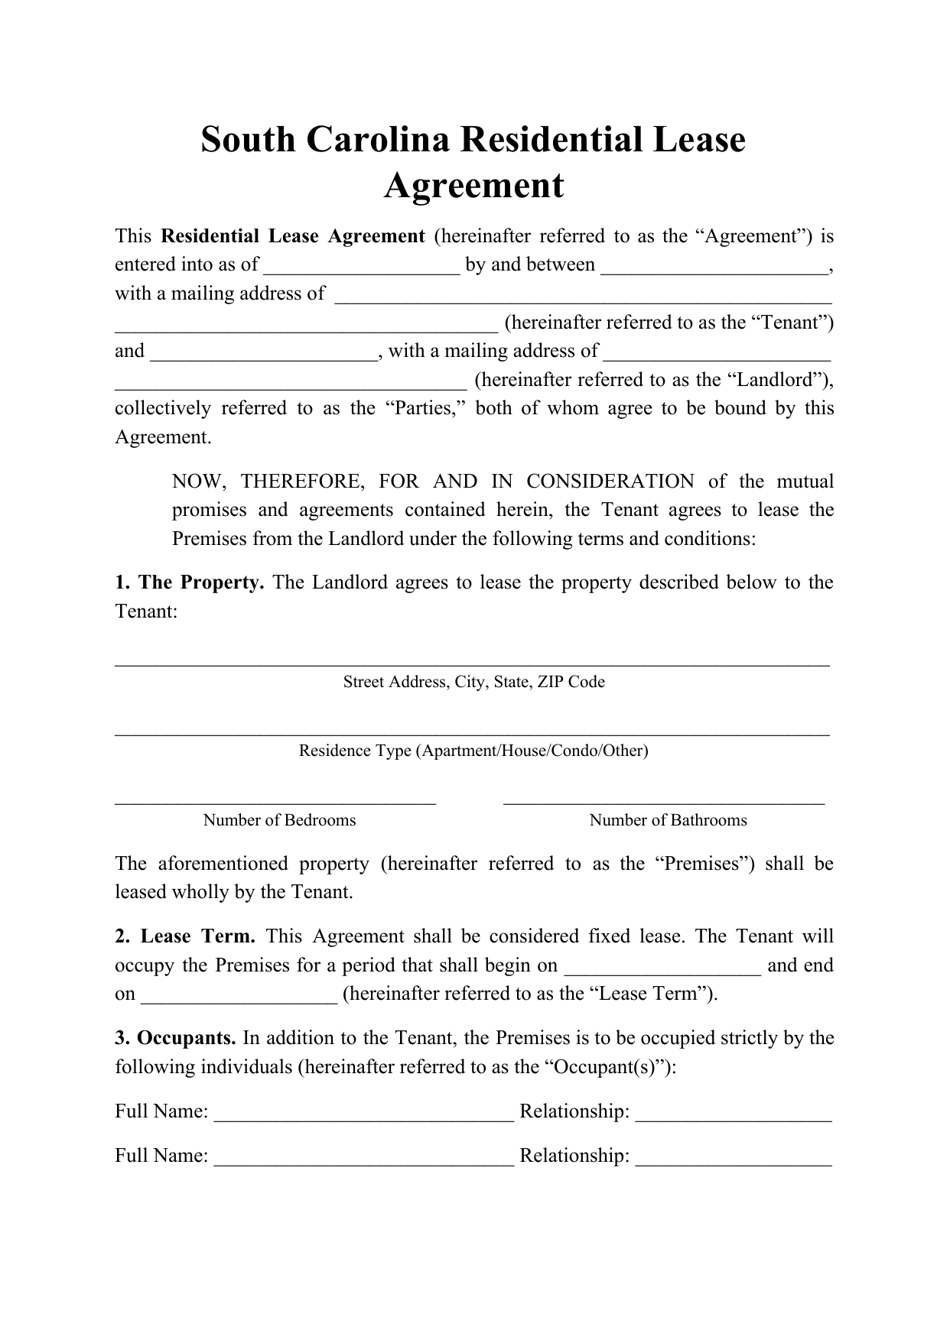 south-carolina-residential-lease-agreement-template-download-printable